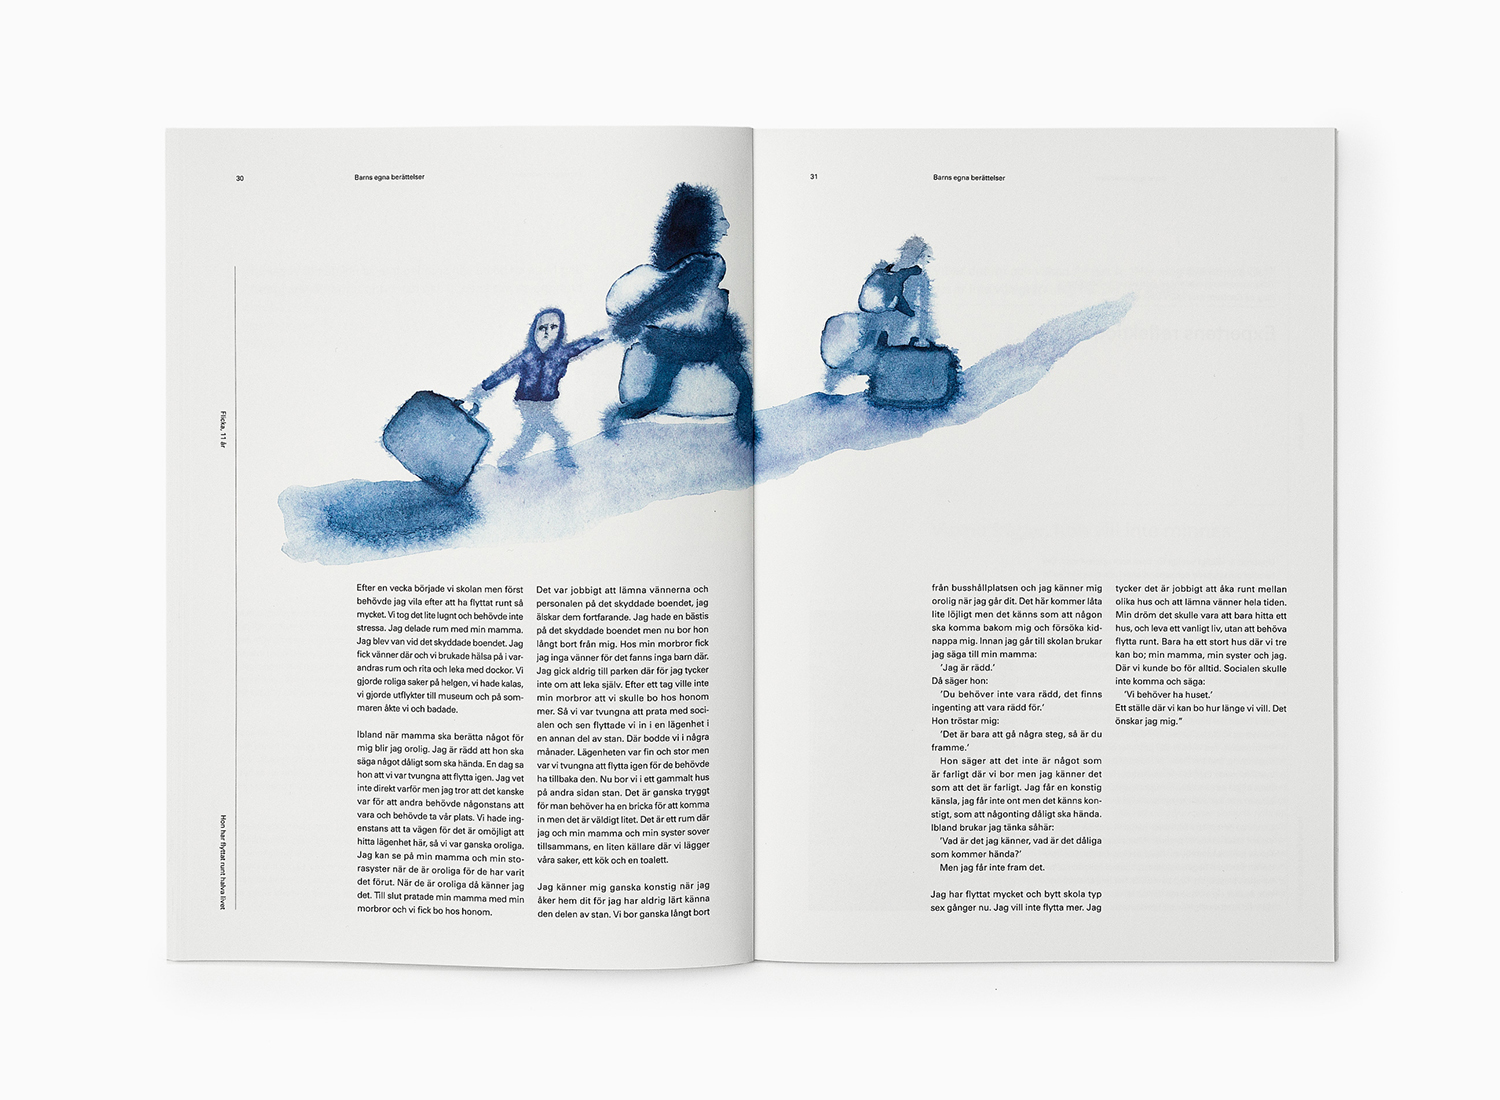 Creative Brochure Design Ideas – Who Protects Me From Violence? by Bedow